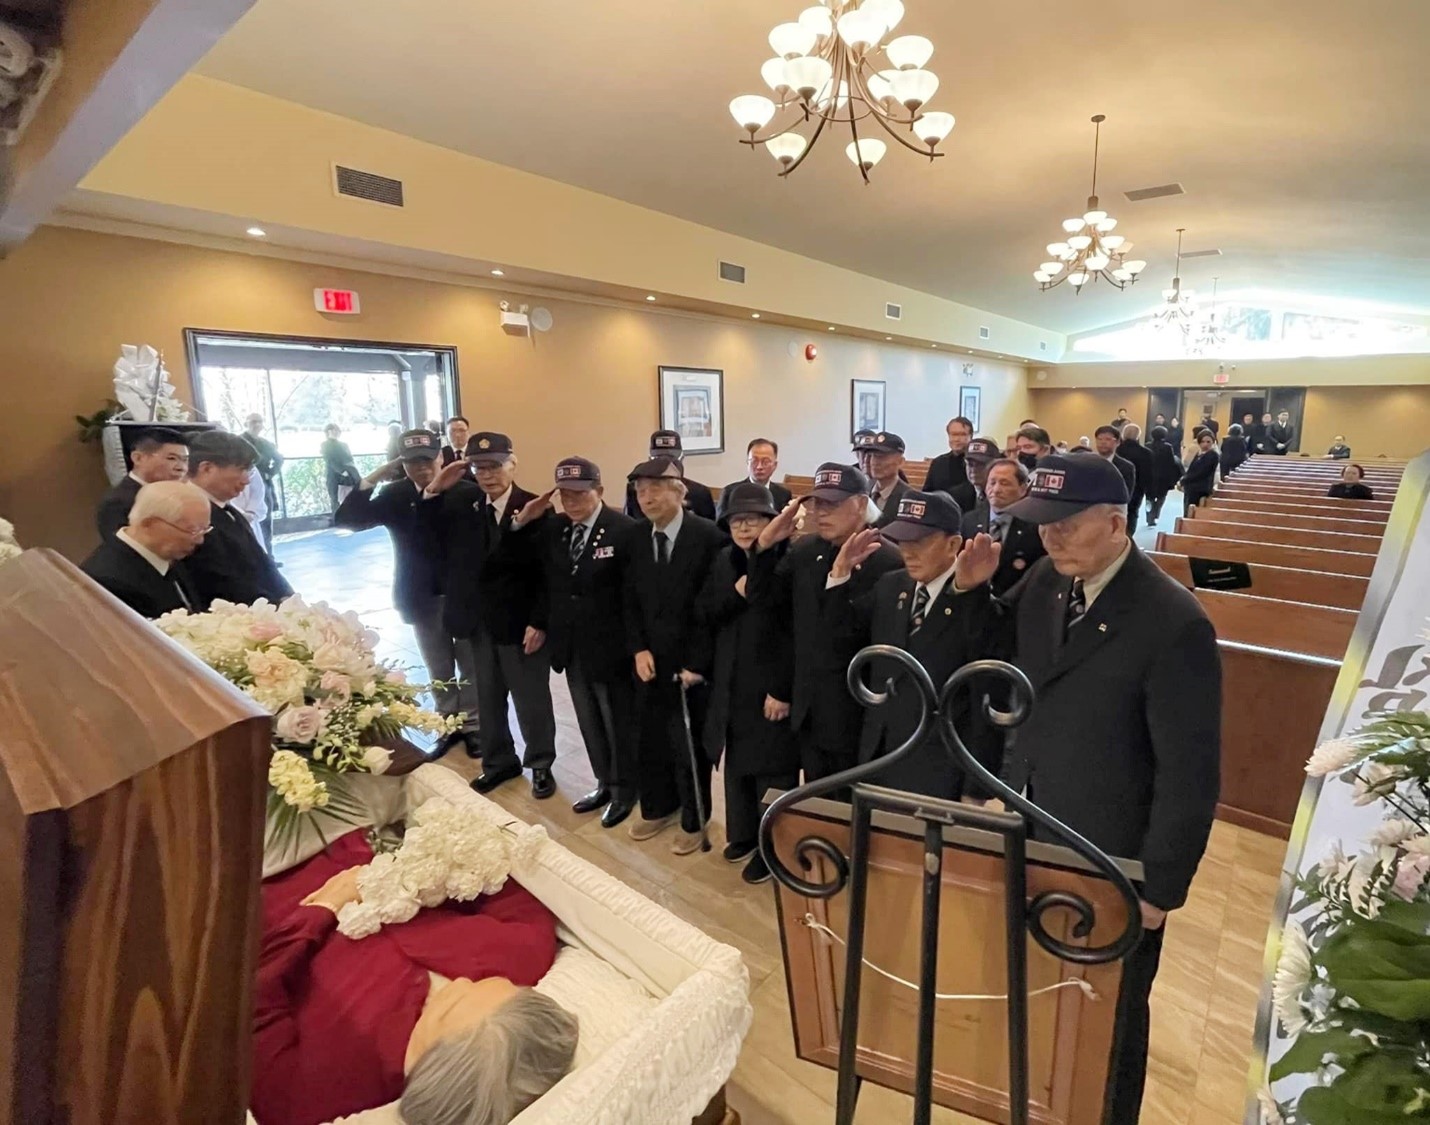 On April 2, the funeral was held for the wife of Advisor Lee; the association members were present at the funeral to pay condolences.